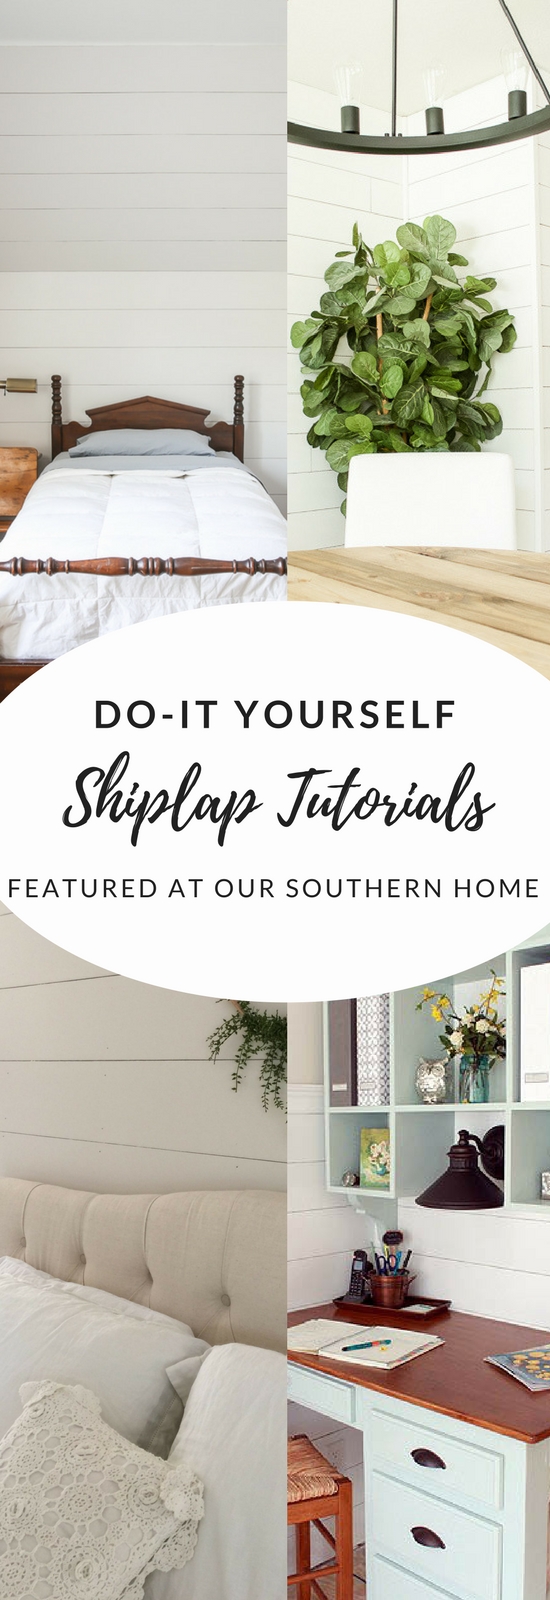 Yes, you can shiplap walls yourself! Here is a collection of simple DIY Shiplap Tutorials to get you started! #diy #shiplap #shiplaptutorials